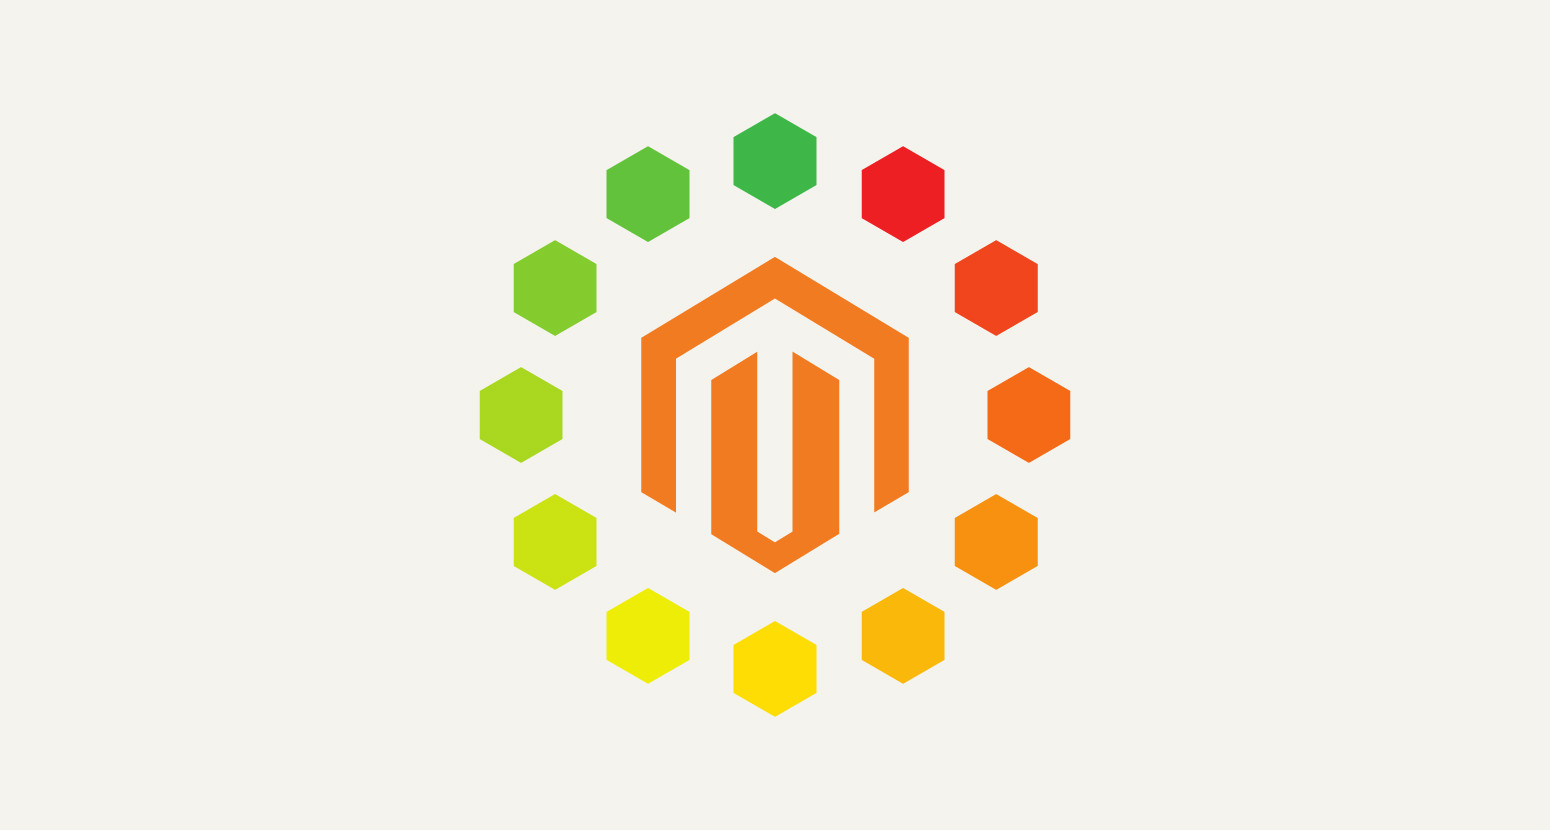 Better Magento support when you need it most.